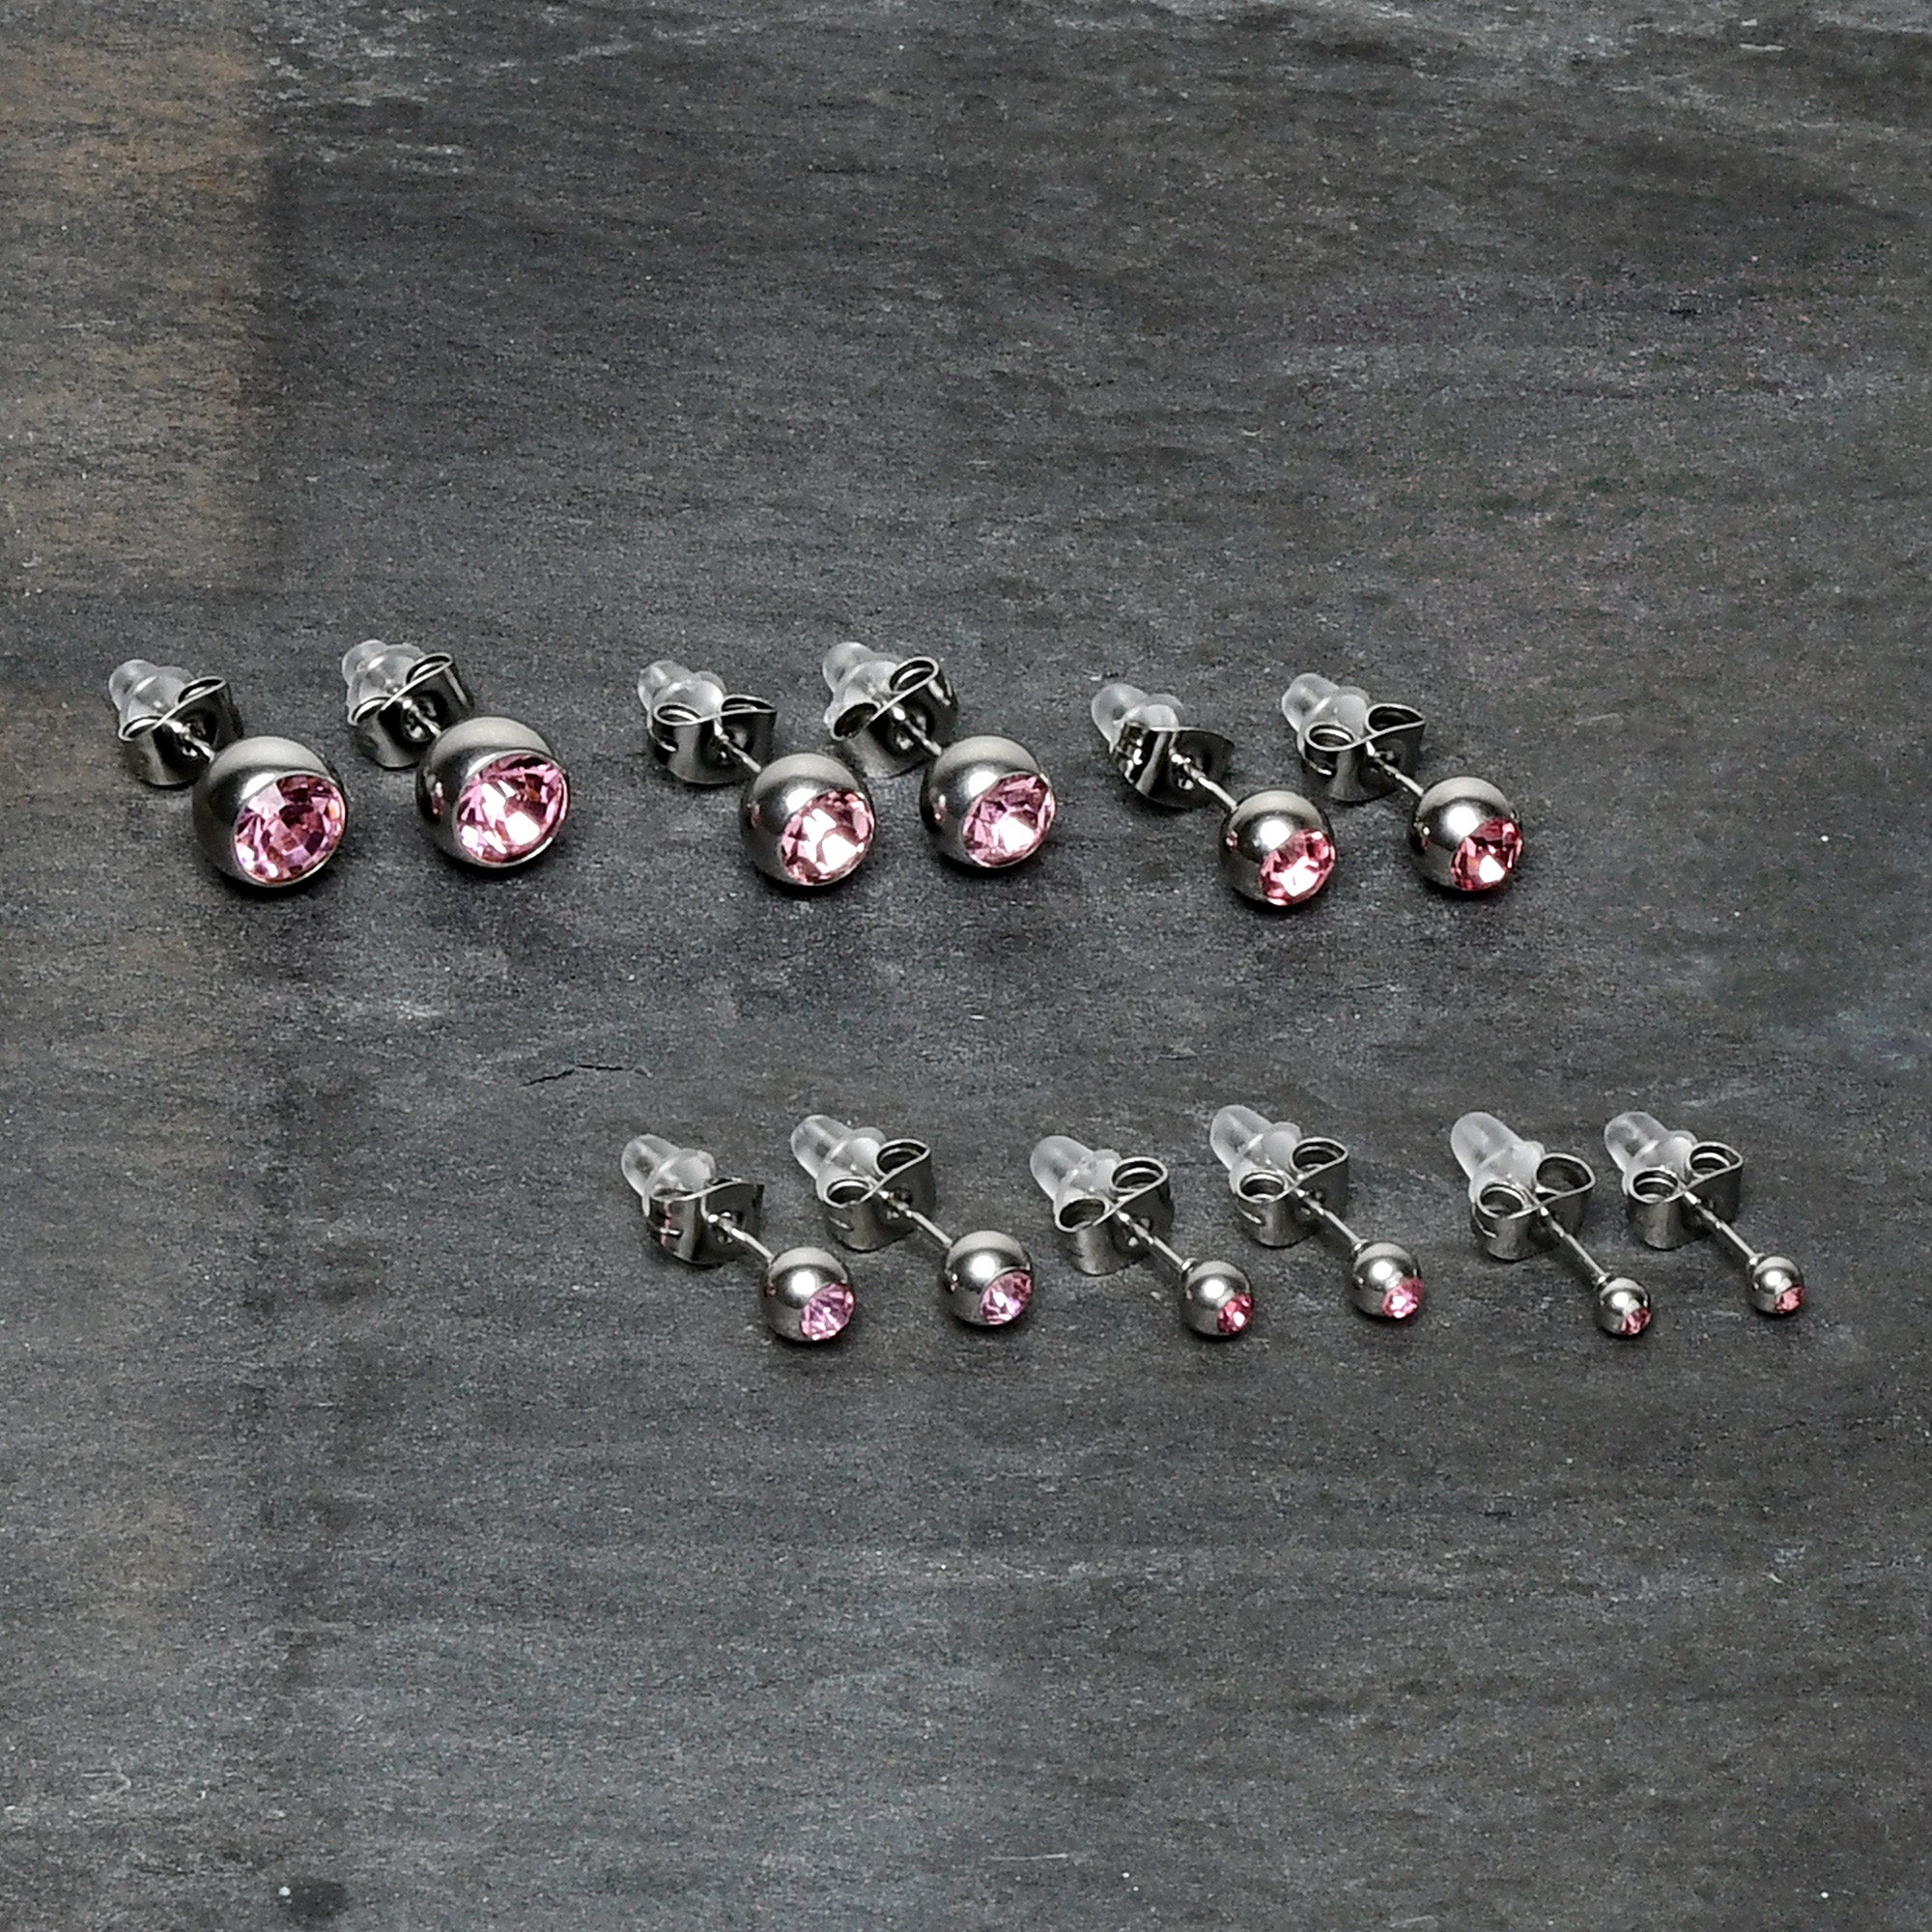 Pink Gem 3mm to 8mm Ball End Stud Earrings Set of 6